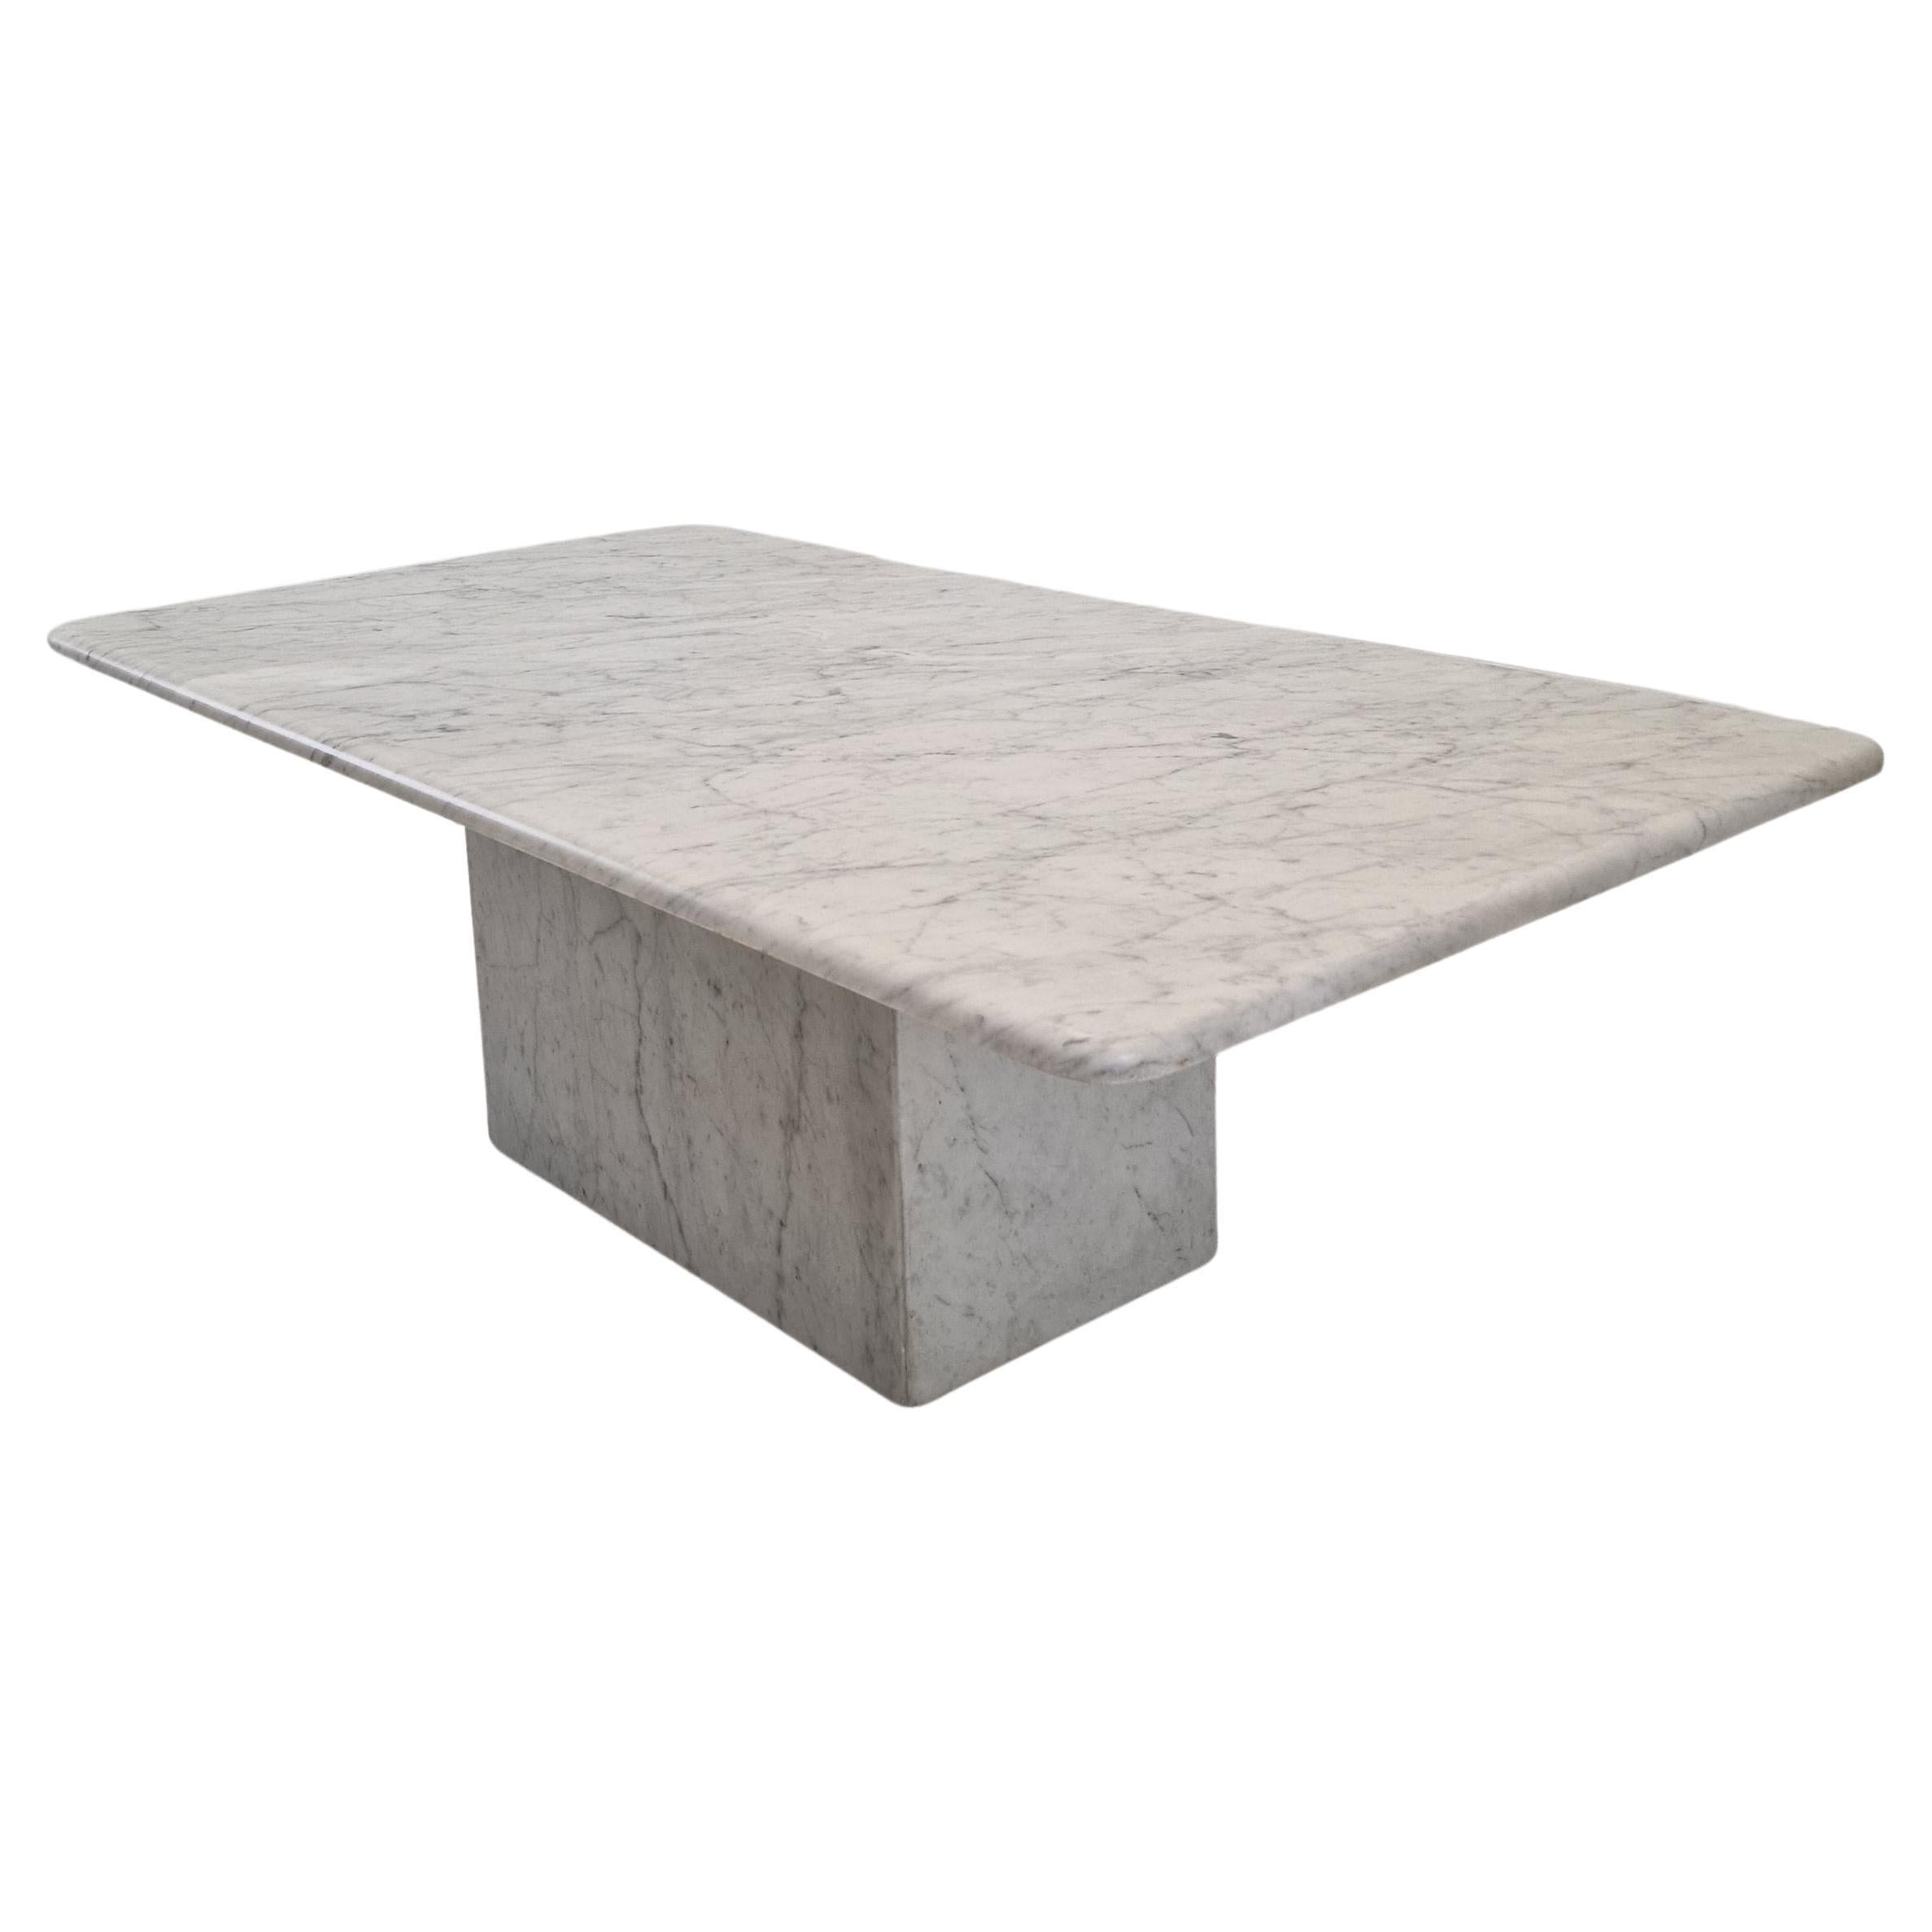 Italian Marble Coffee Table, 1980s For Sale